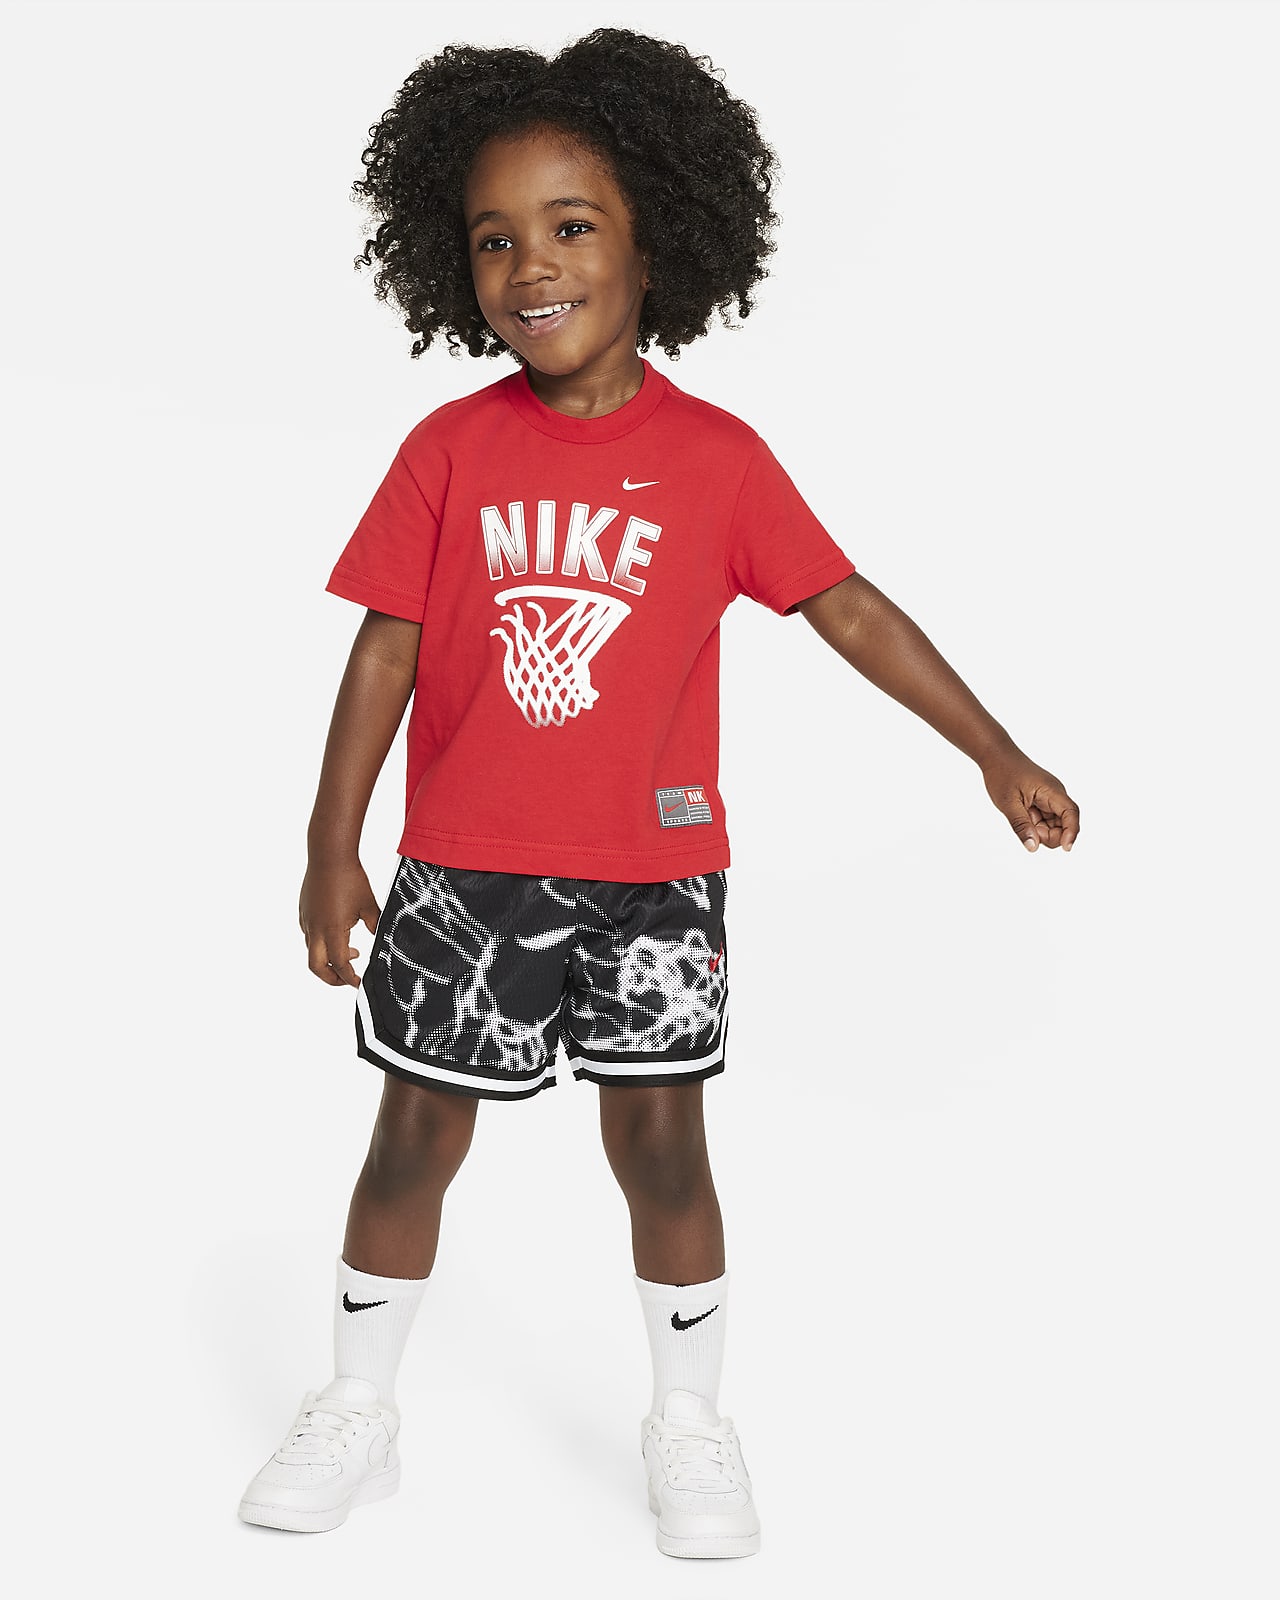 Nike Dri-FIT Culture of Basketball Toddler 2-Piece Mesh Shorts Set